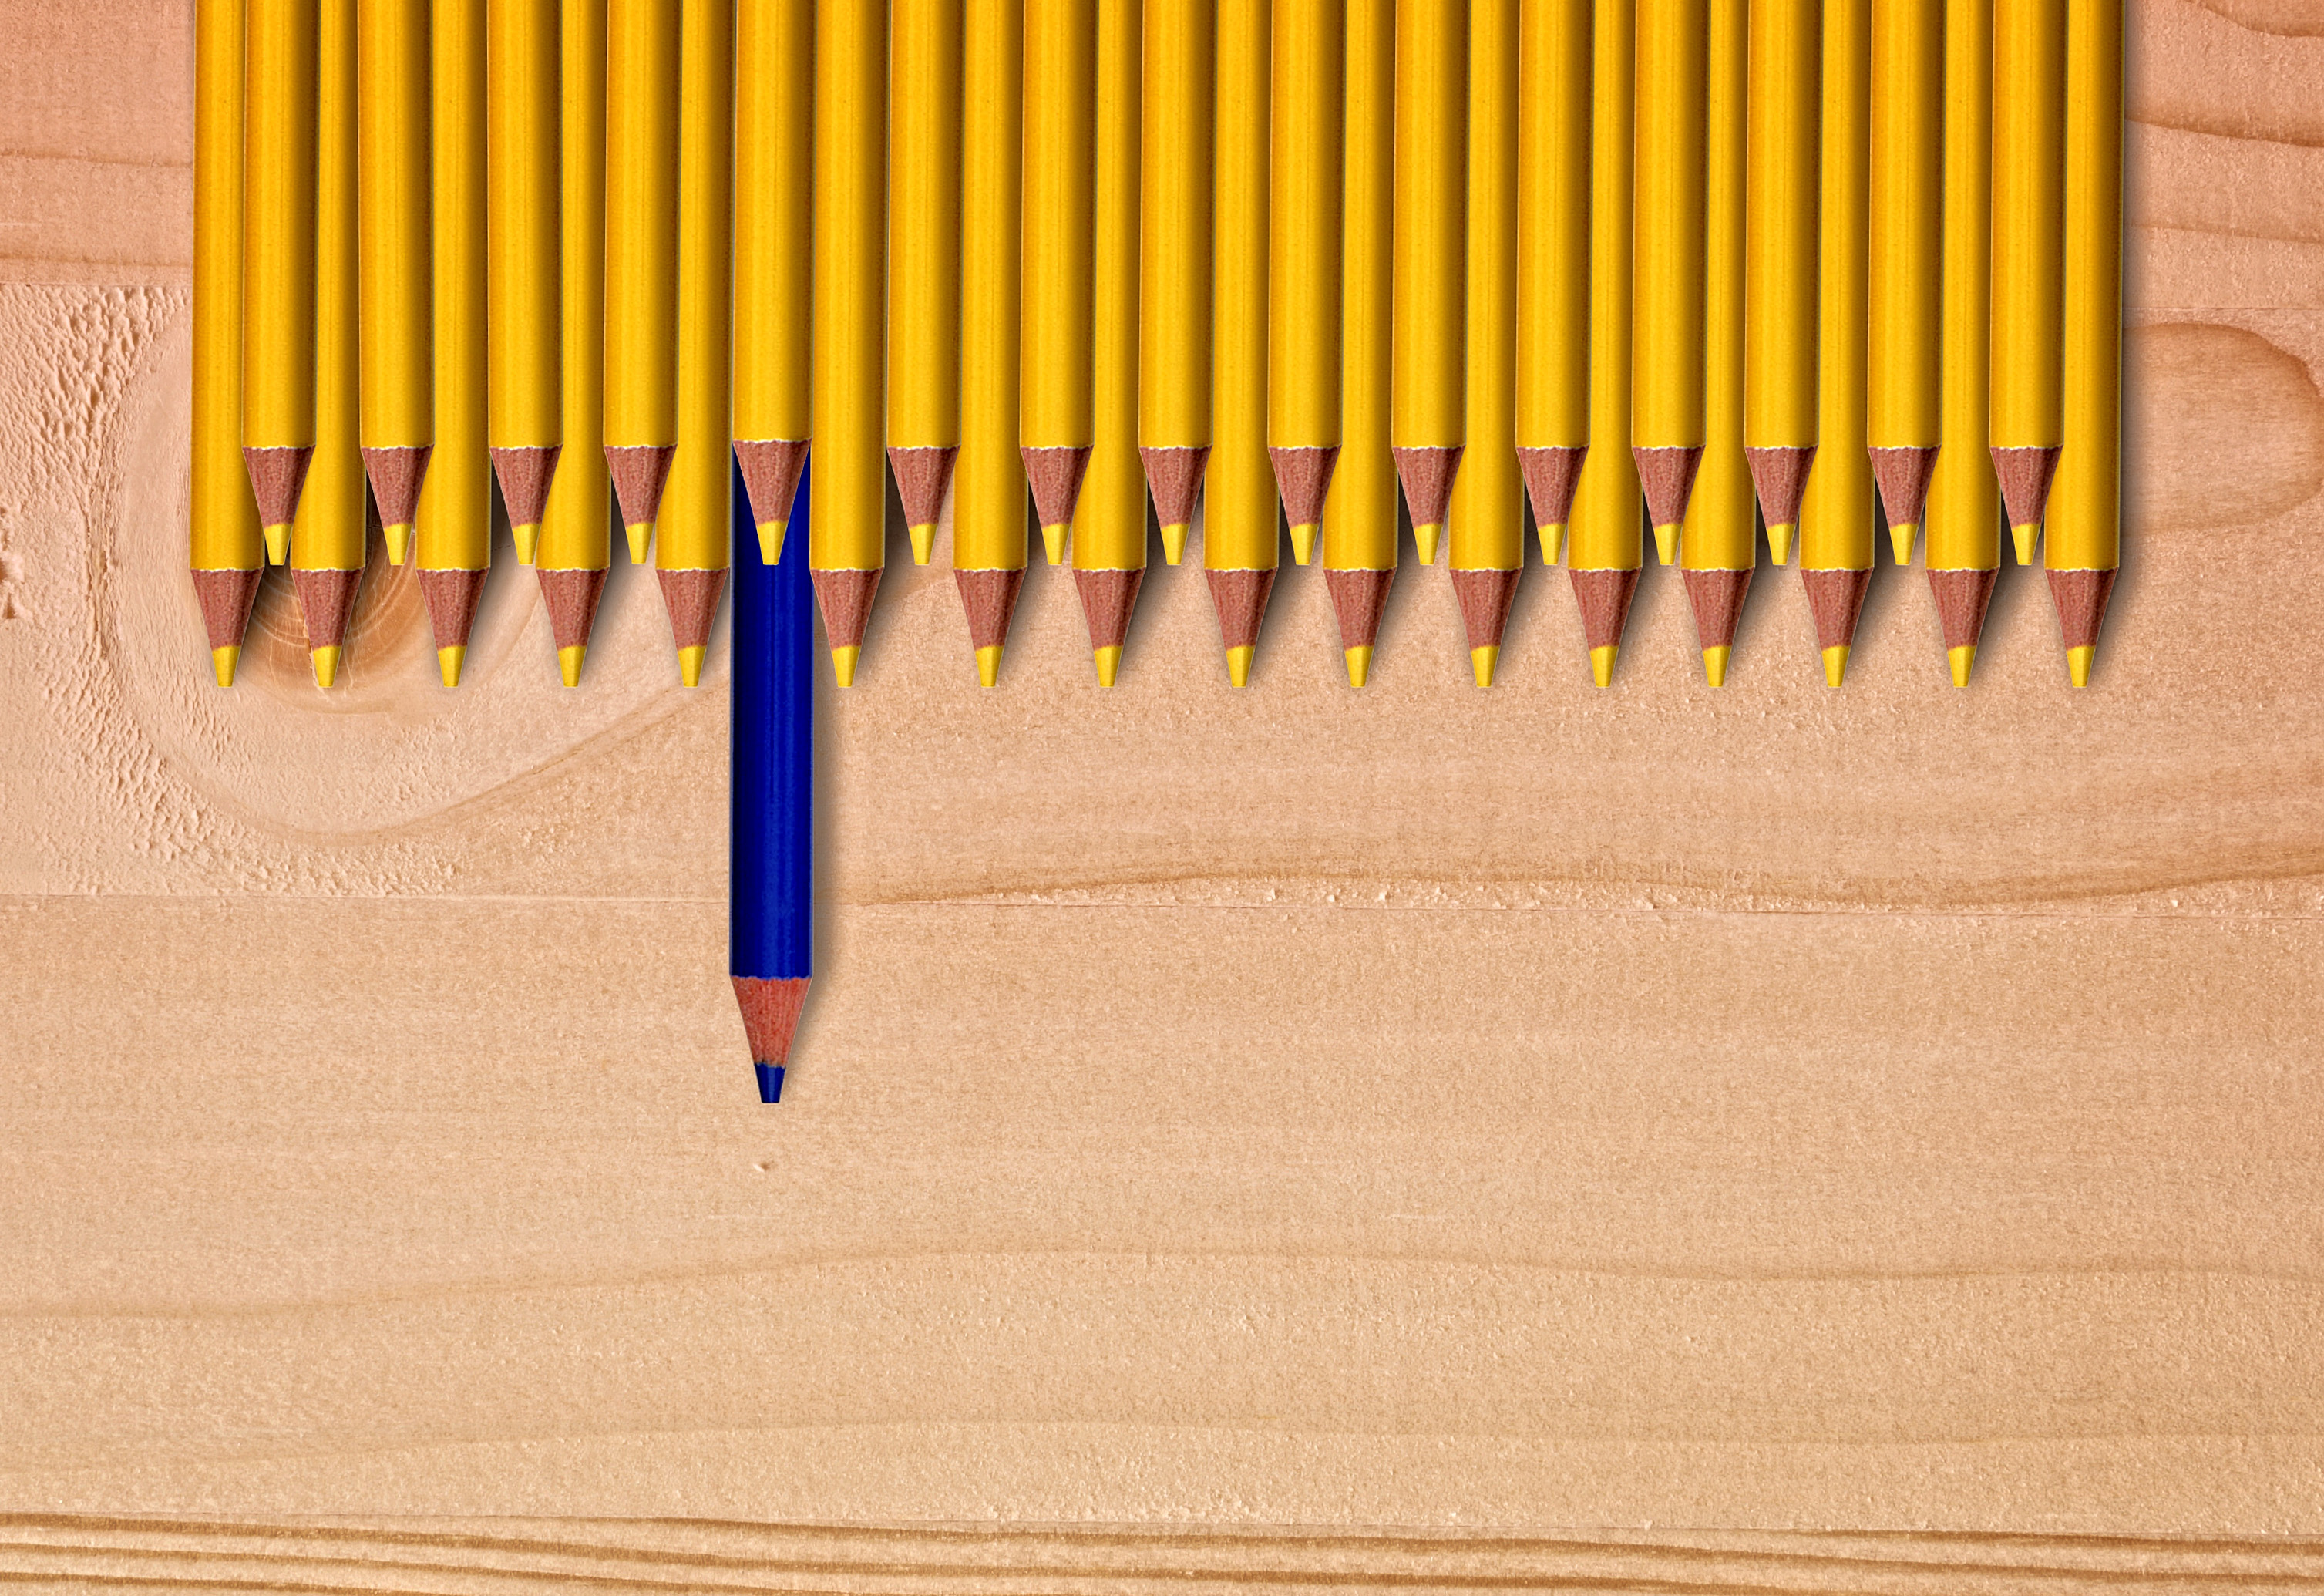 The one standing out - Concept of individuality, Abstract, Pen, Single, Sharpened, HQ Photo